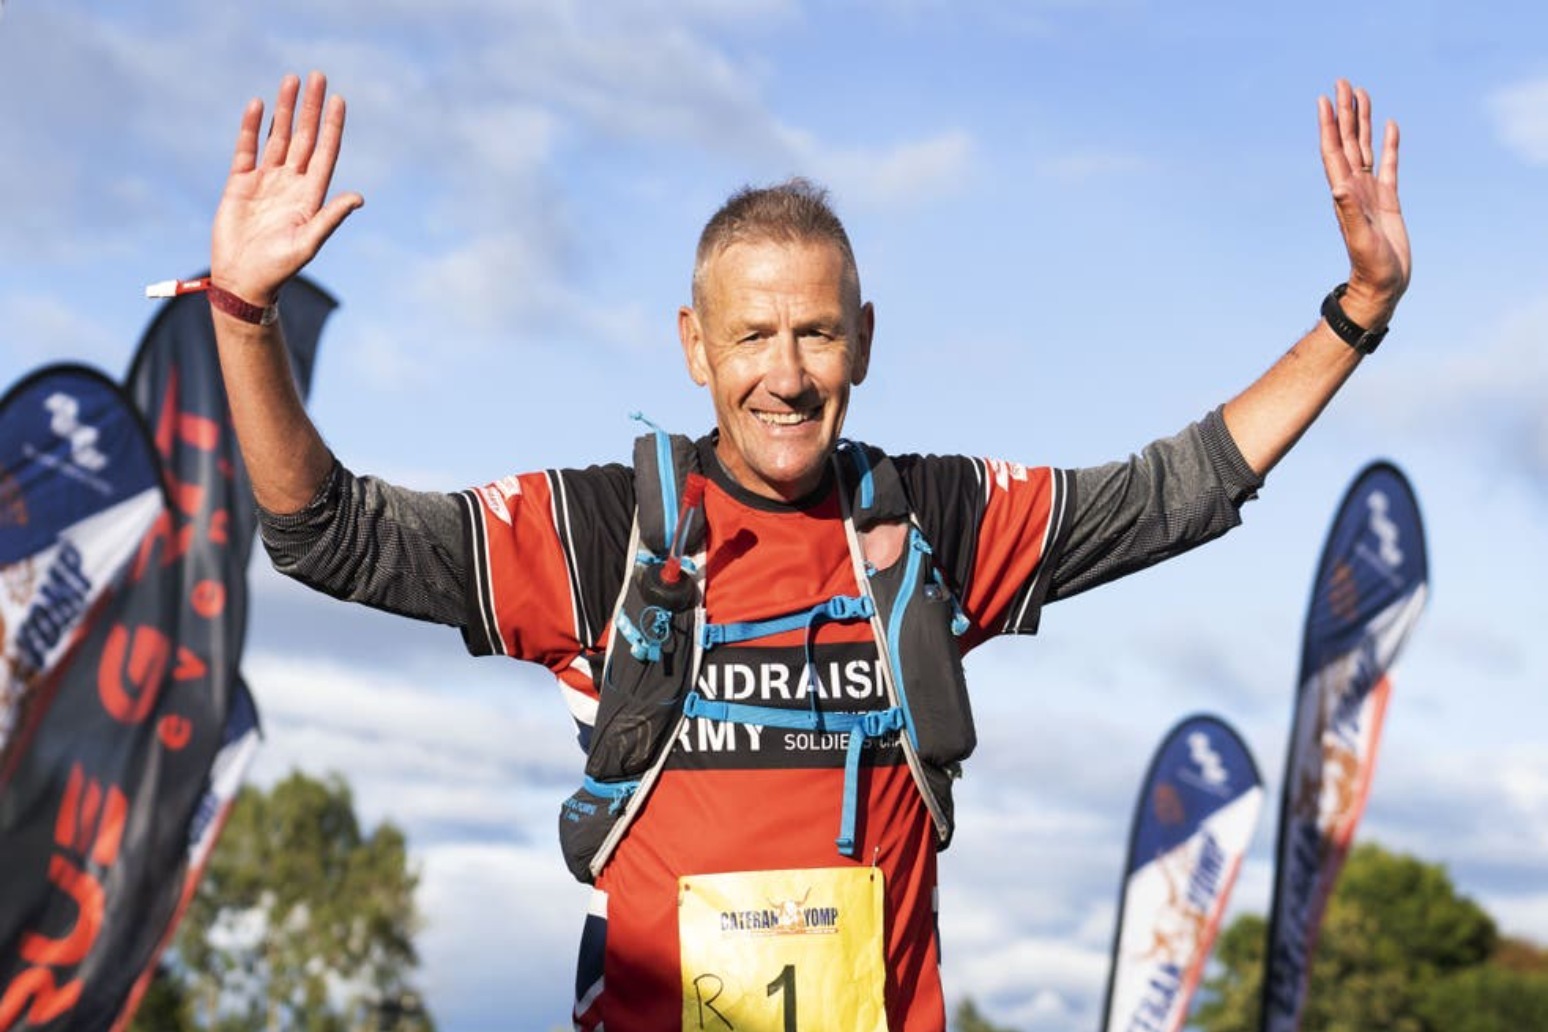 Army veteran inspired by Captain Sir Tom Moore sets record in endurance event. 